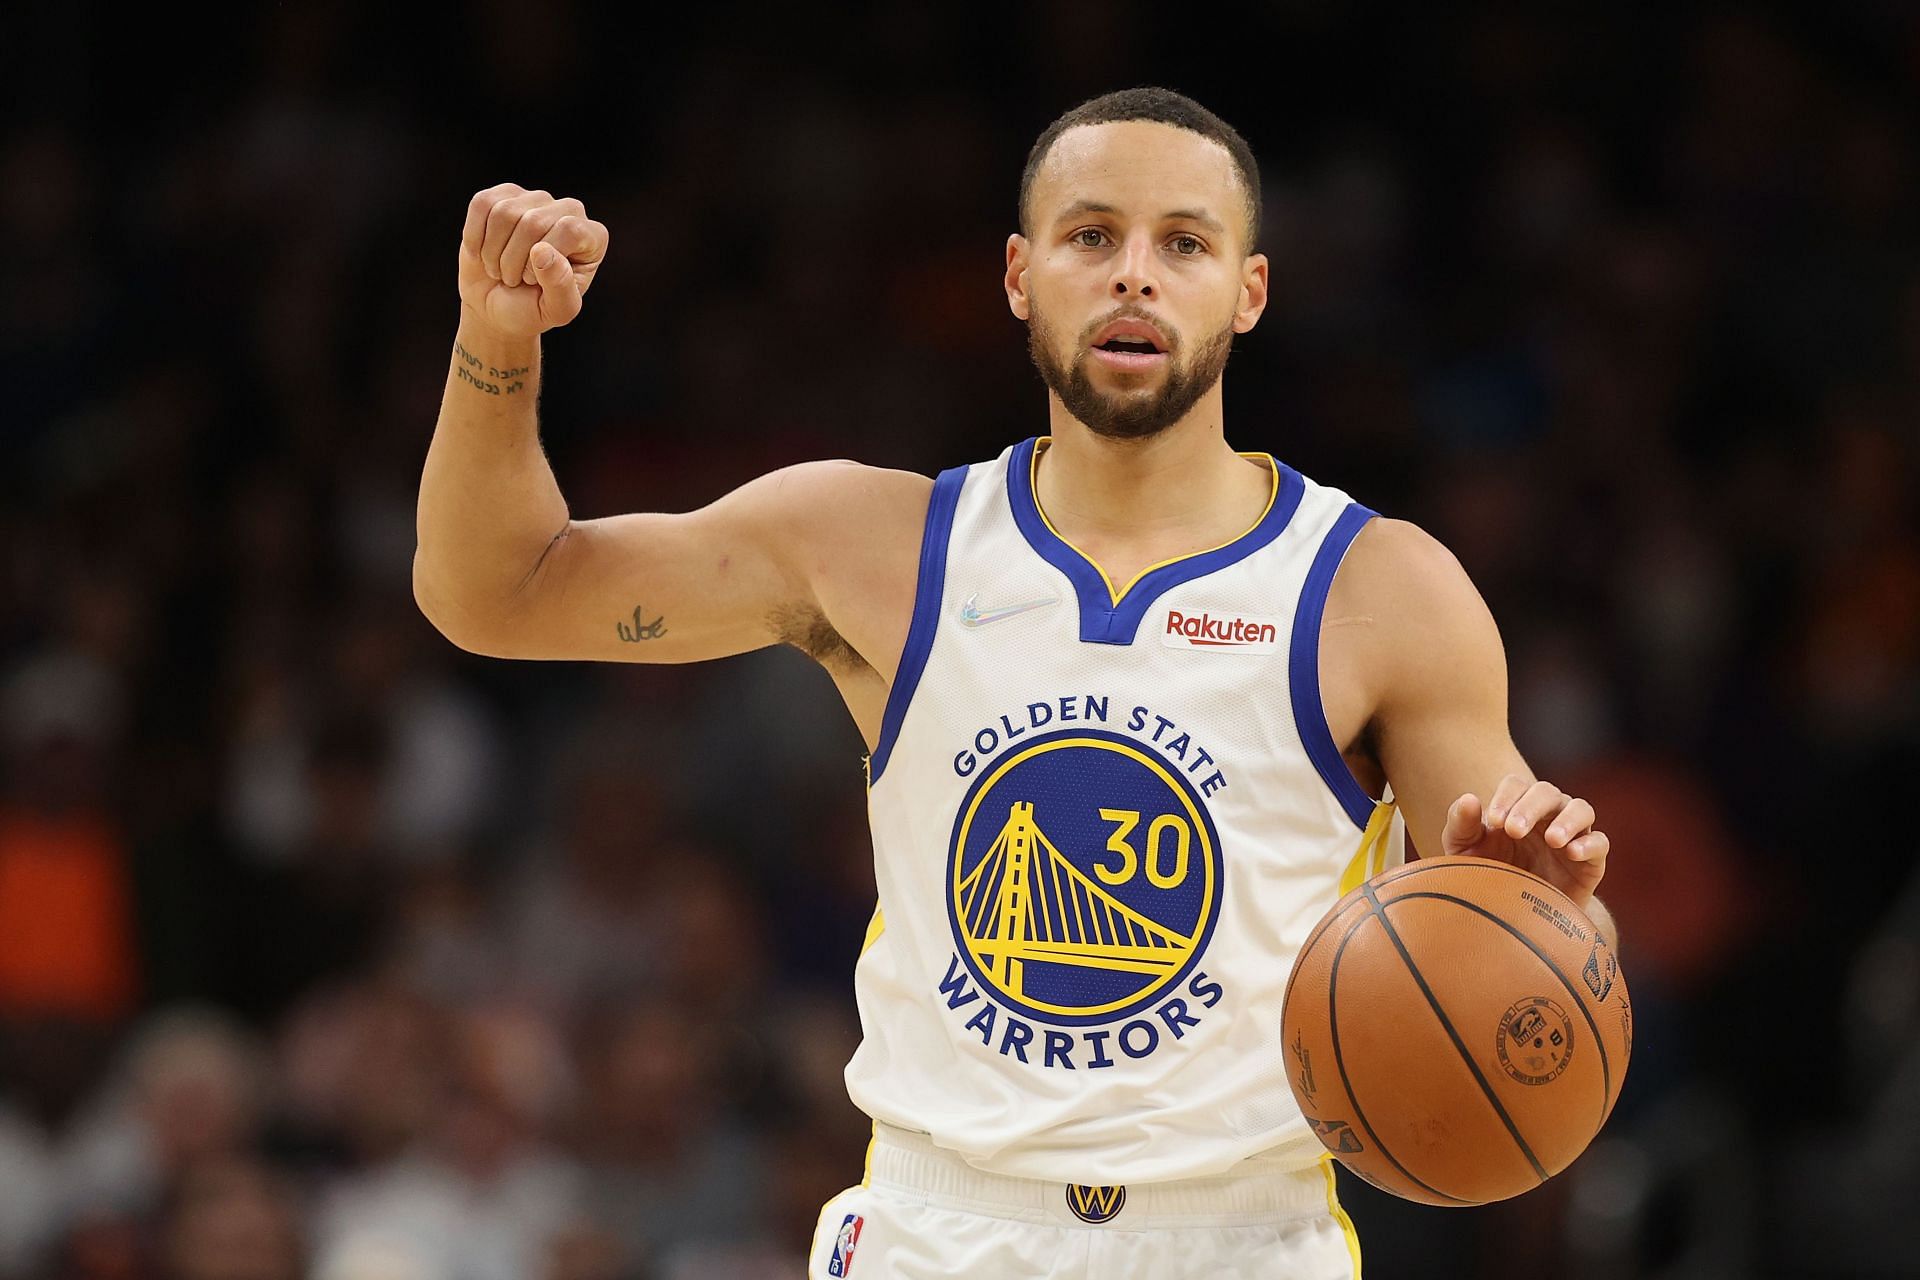 The Fascinating Pregame Routine of NBA MVP Stephen Curry